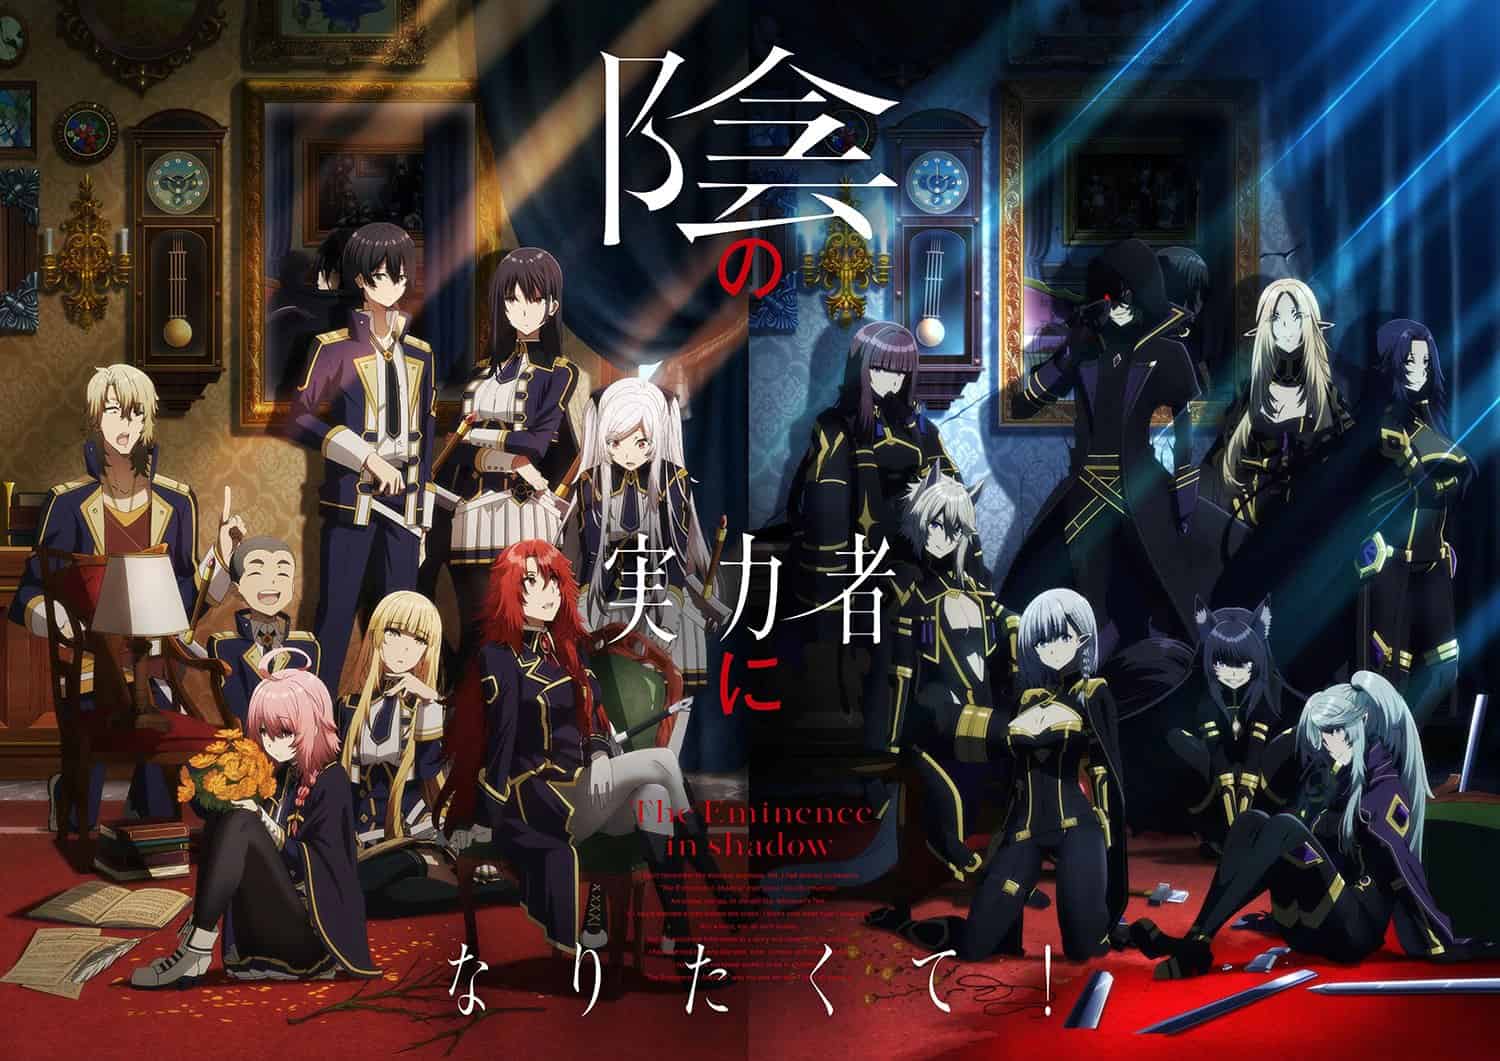 10 Anime Like The Eminence in Shadow